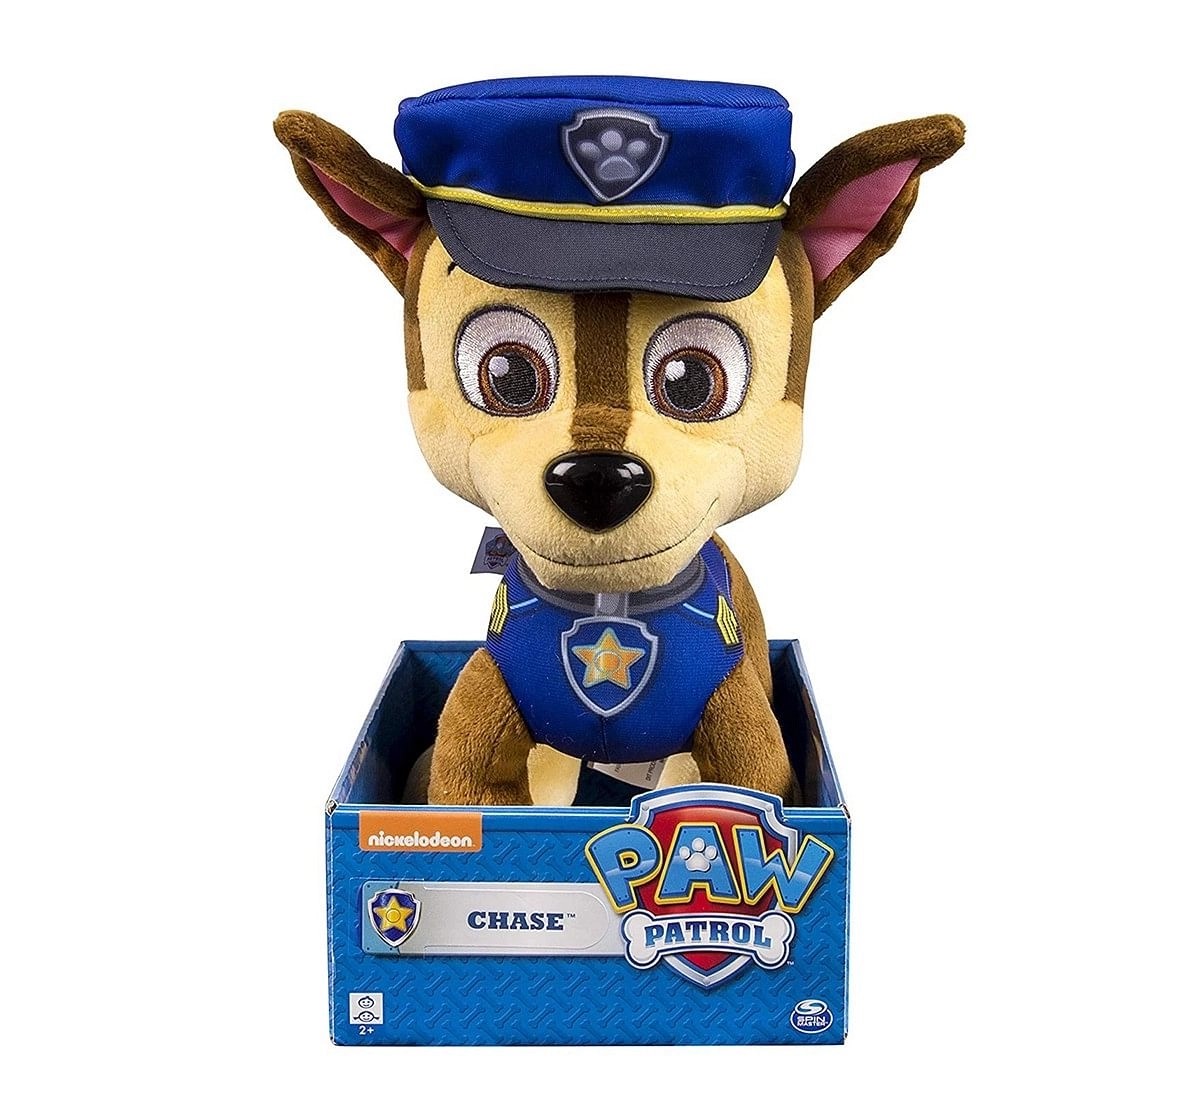  Paw Patrol 10 Inch Plush Chase Character Soft Toys for Kids age 3Y+ - 13.5128 Cm 